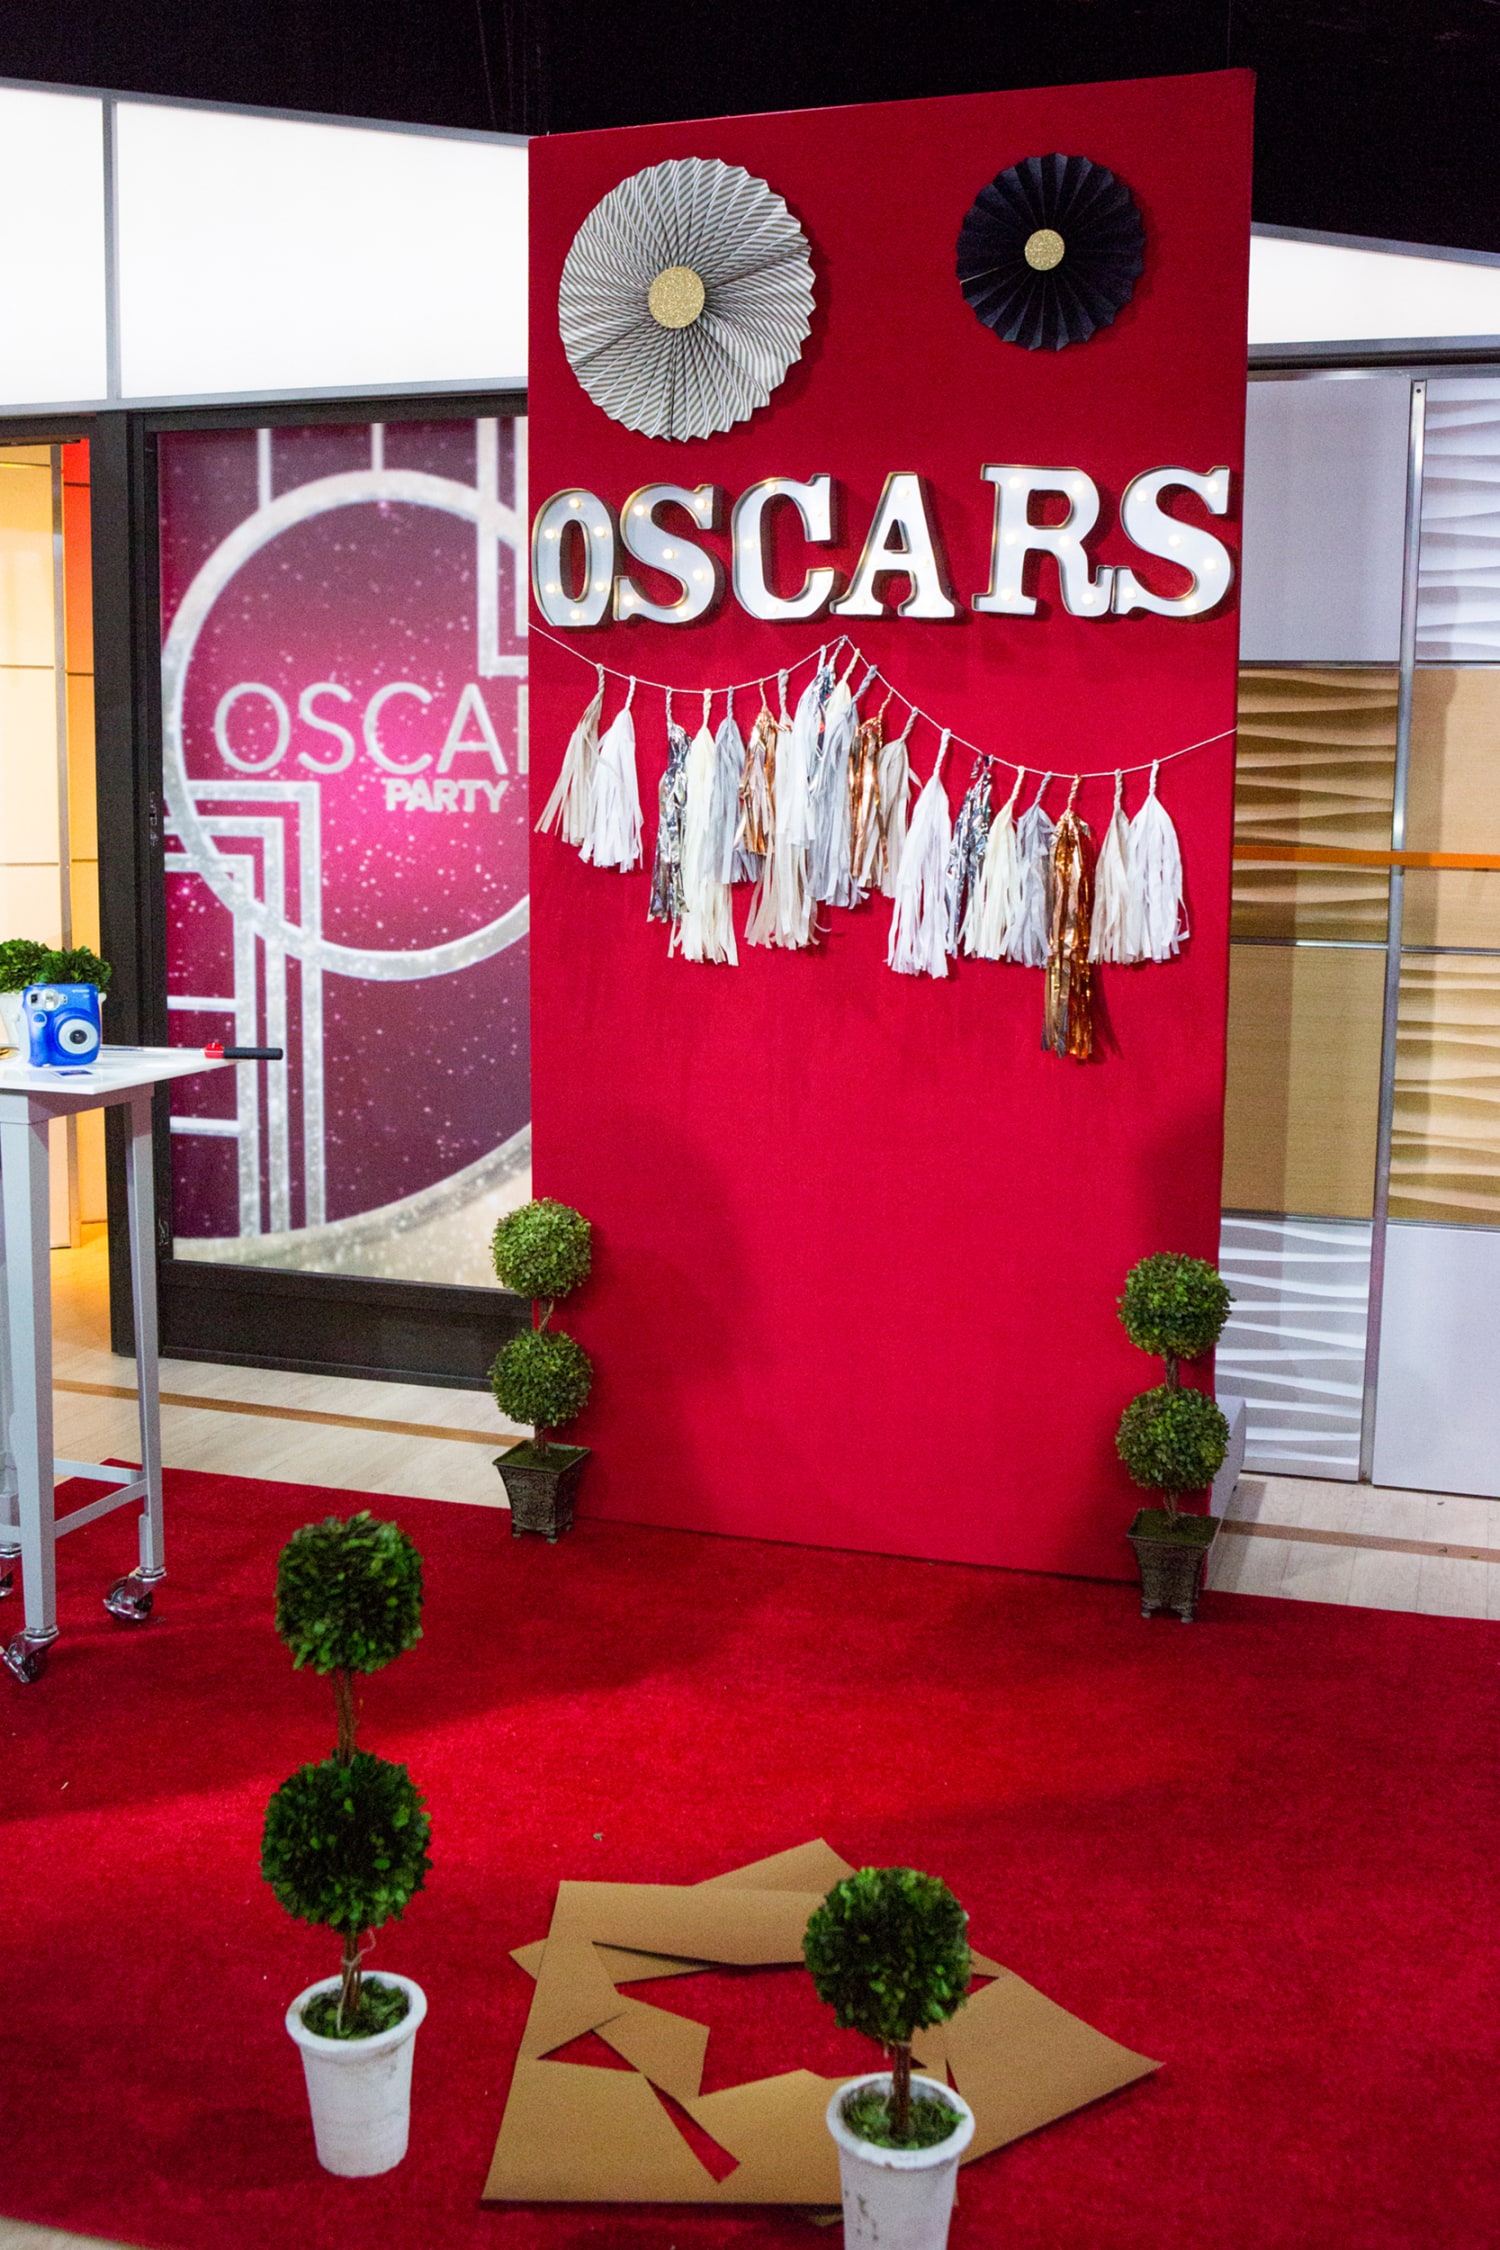 Oscar party ideas: 7 DIY decorations, games, food and more